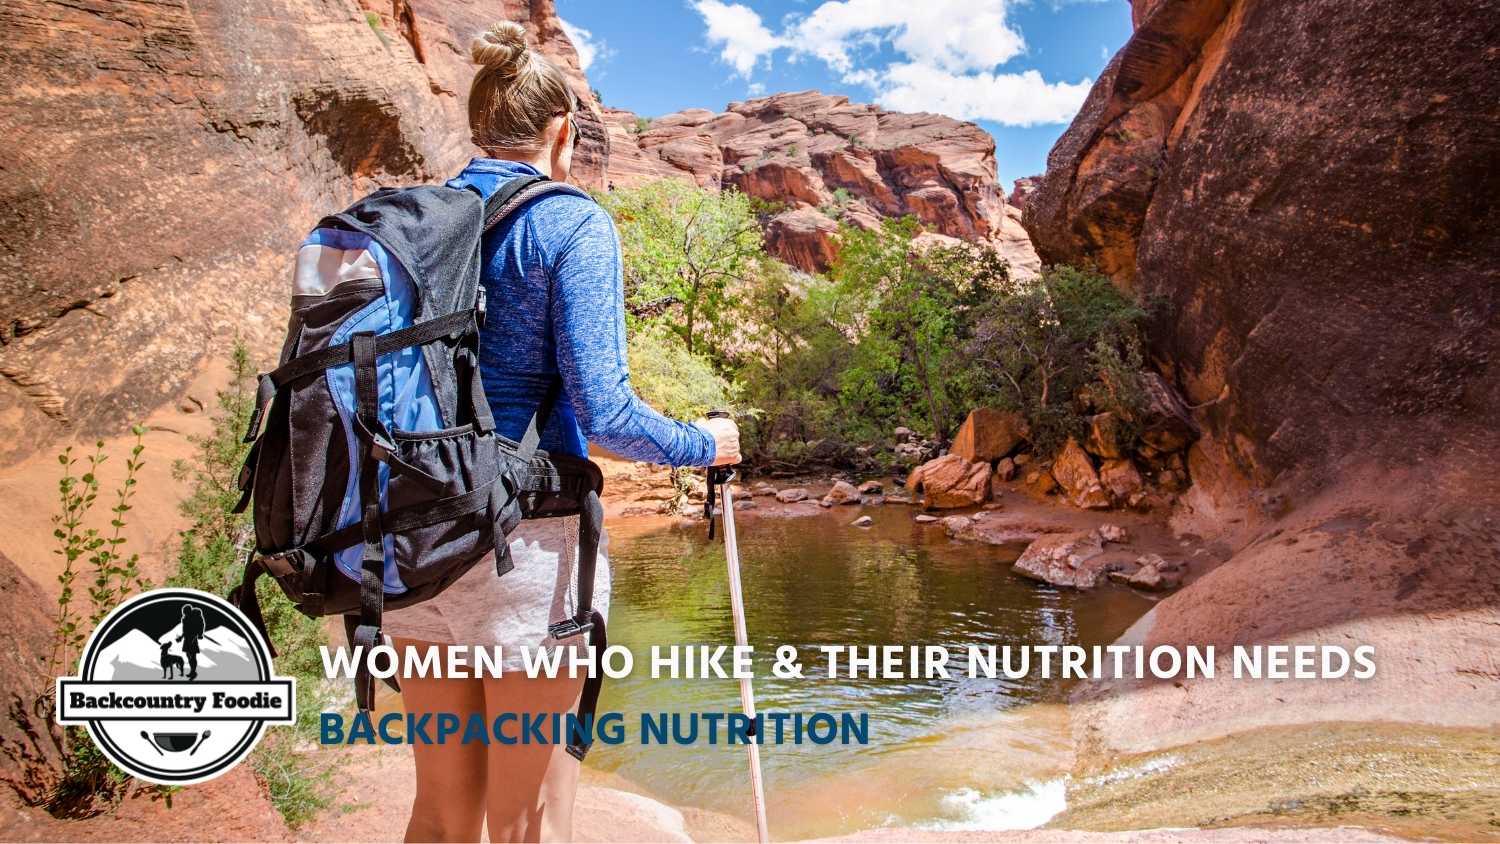 Backcountry Foodie Blog Women Who Hike and Their Nutrition Needs Backpacking Meal Planning